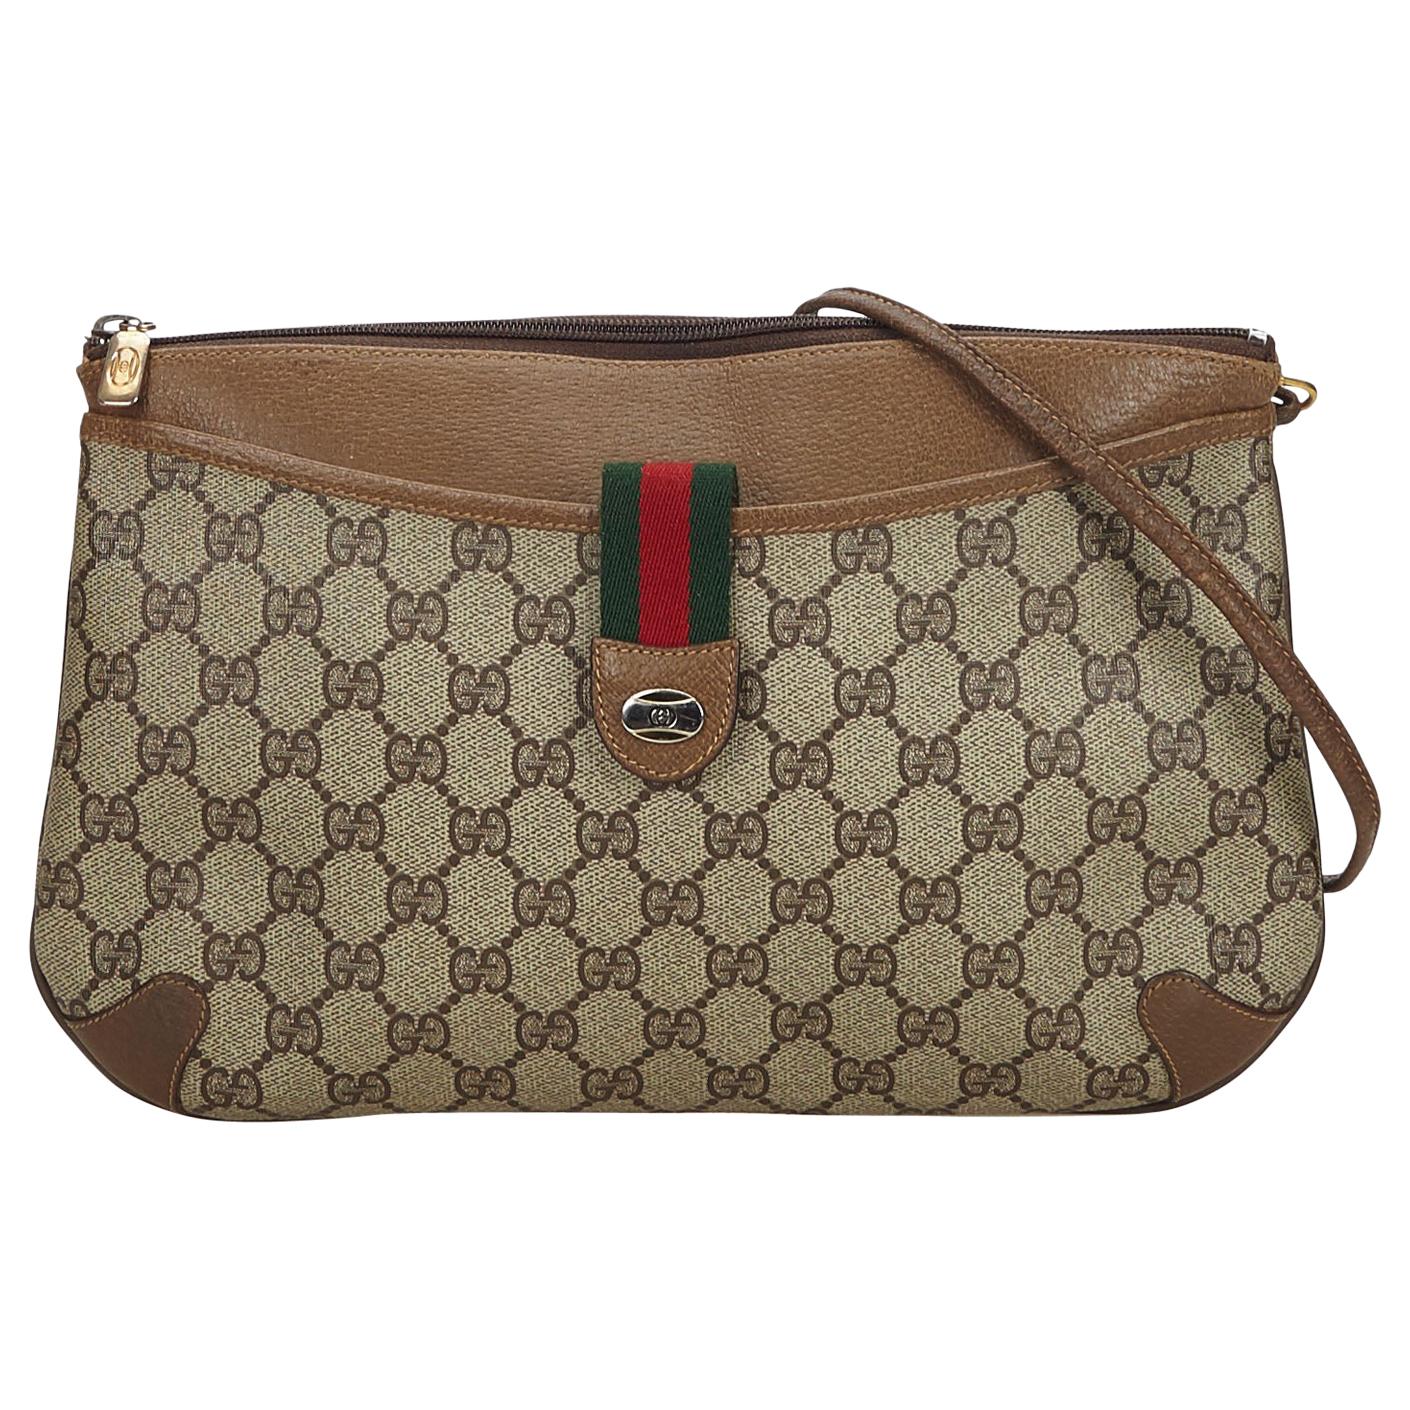 Vintage Authentic Gucci GG Supreme Web Crossbody Bag ITALY w MEDIUM  For Sale